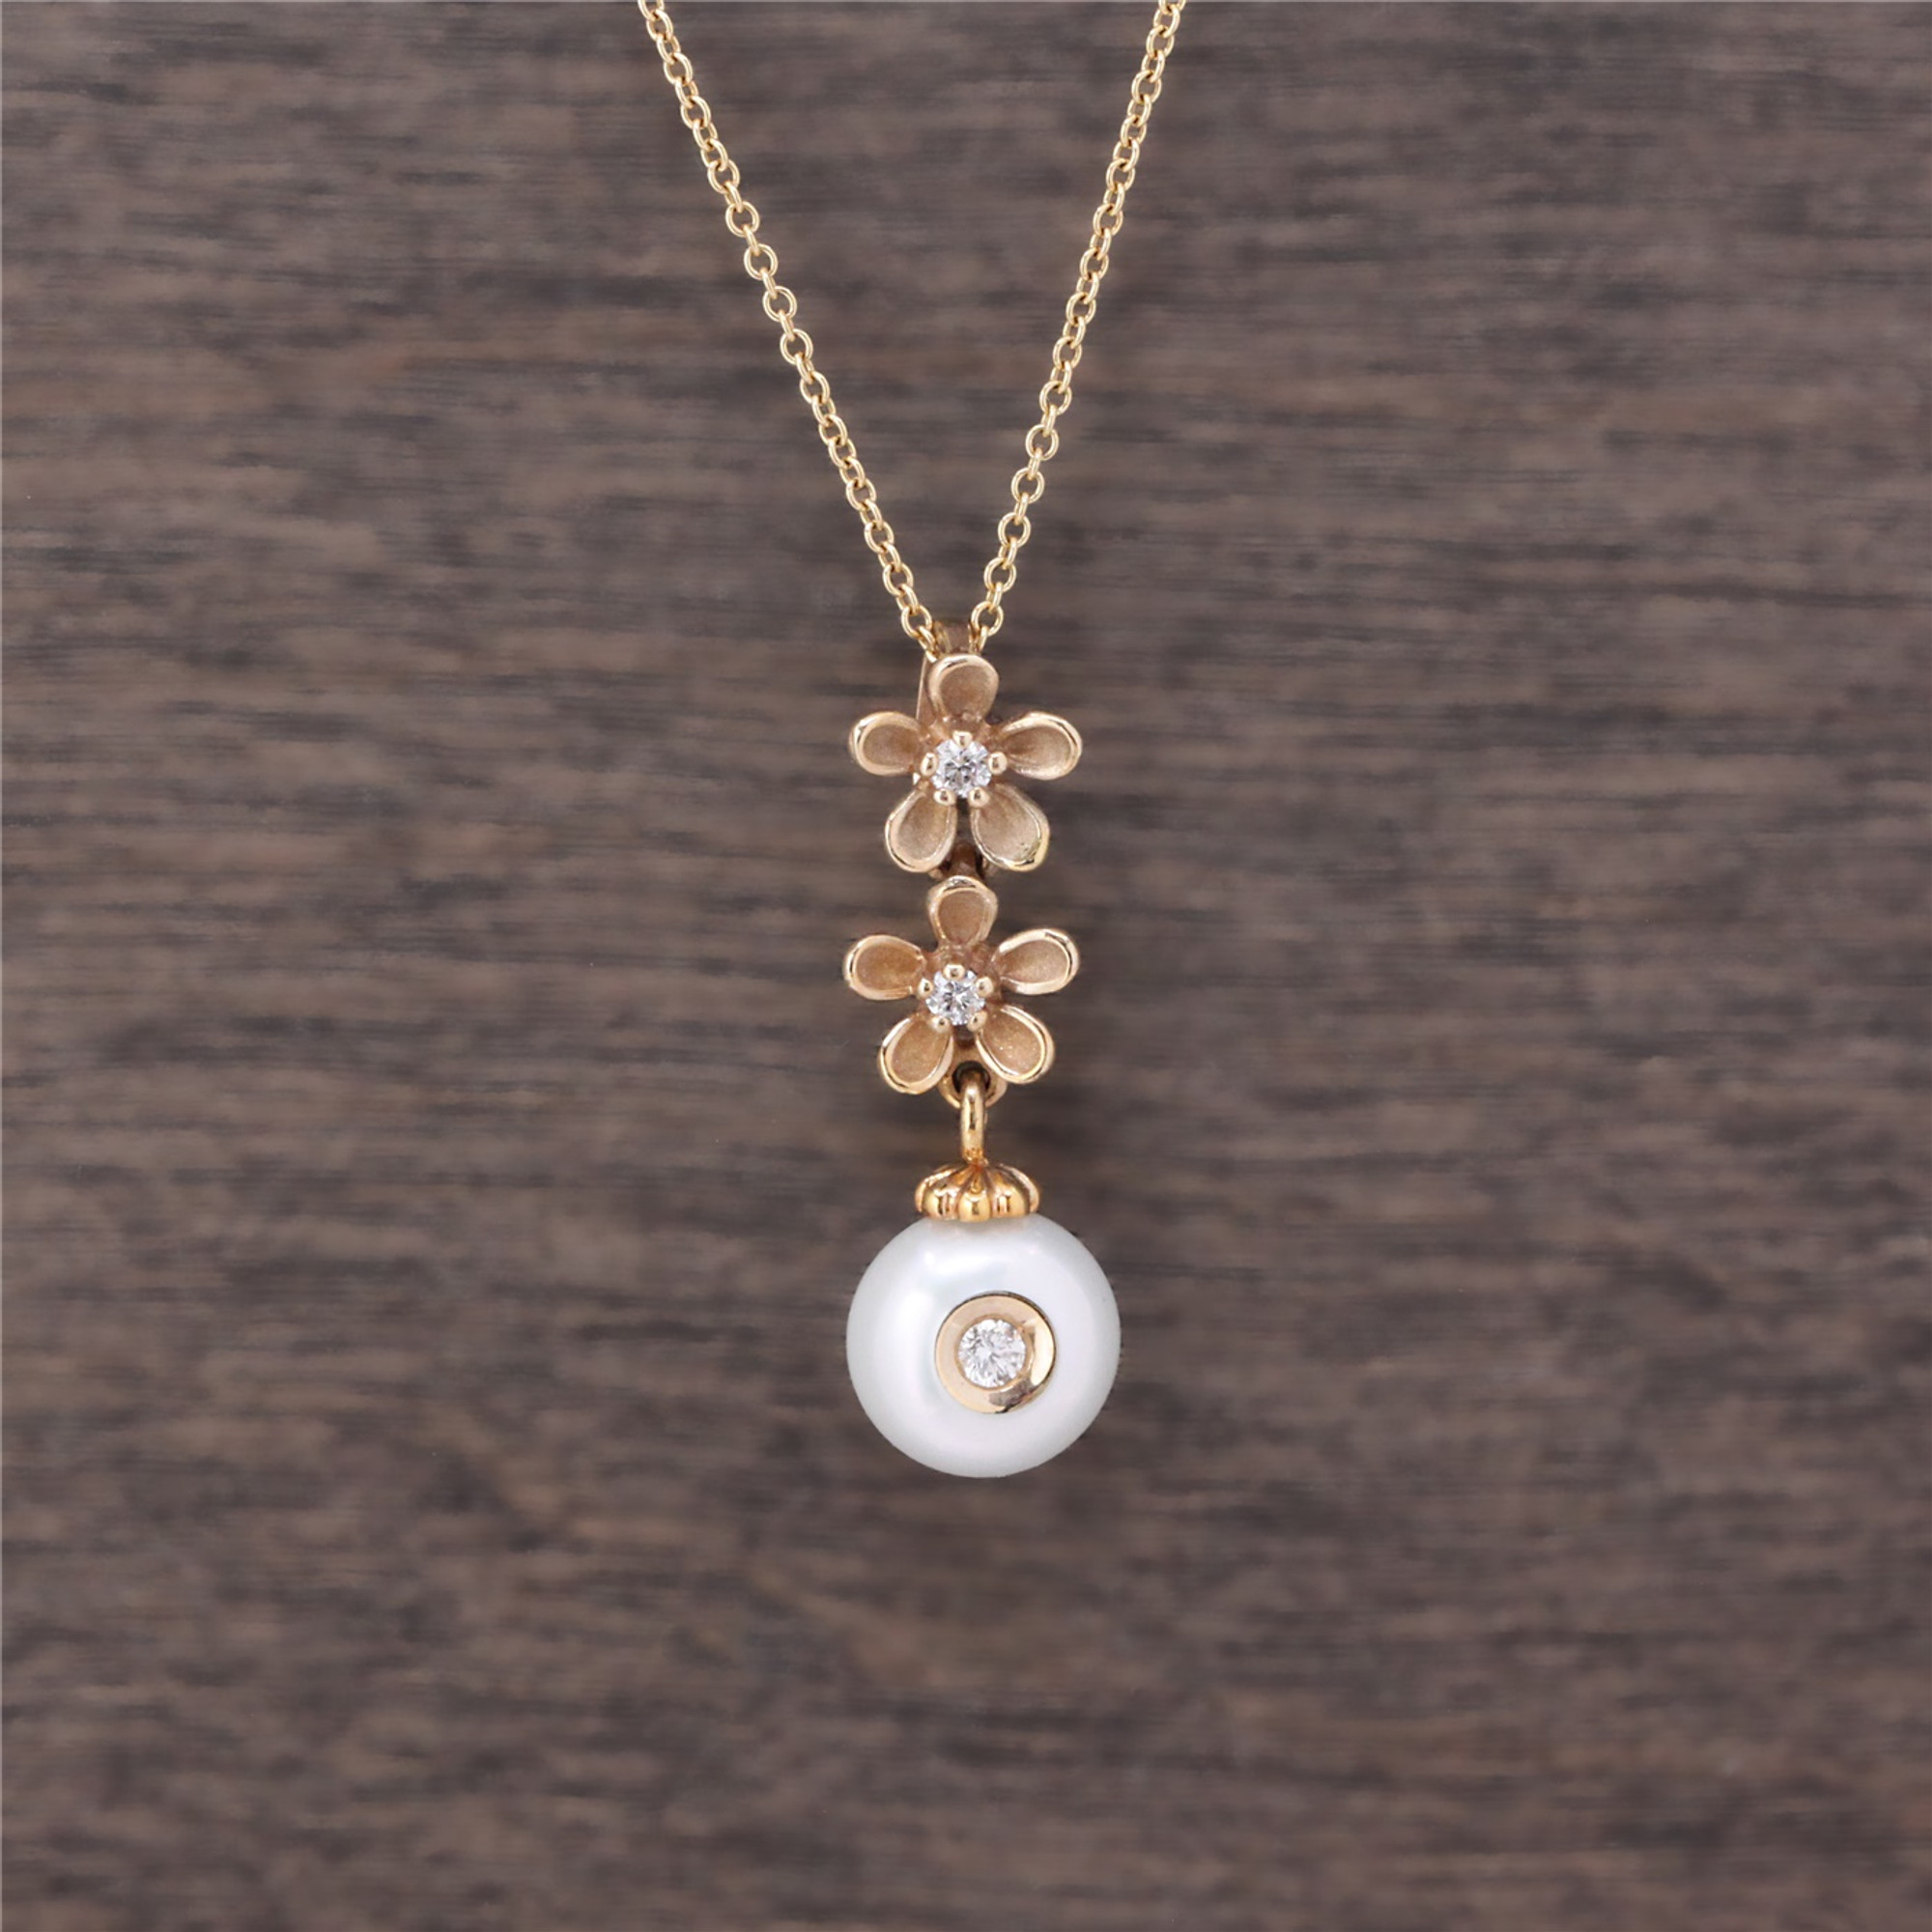 Flower Necklace - Gloria | Ana Luisa | Online Jewelry Store At Prices  You'll Love